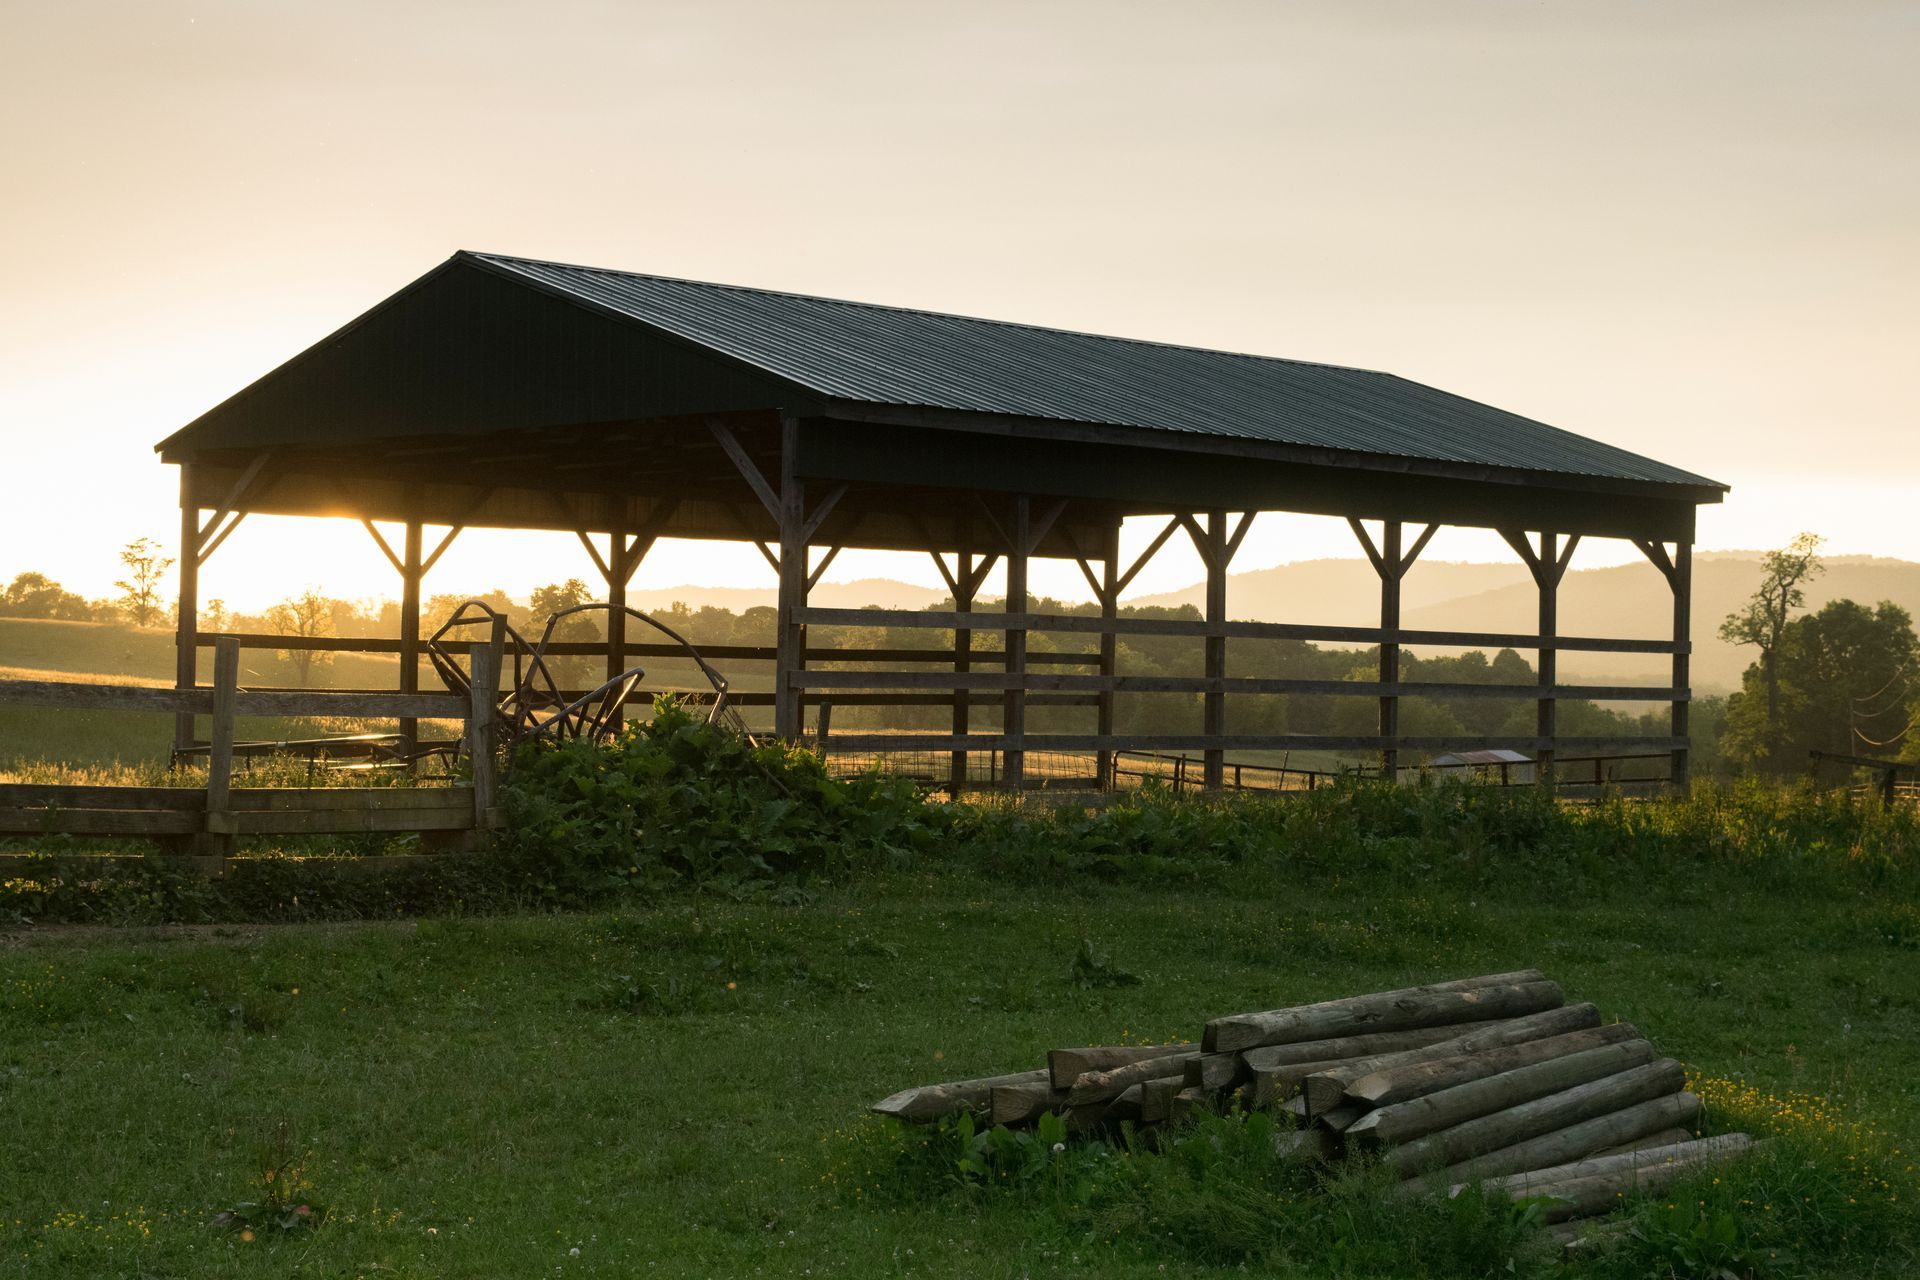 A pole barn with a metal roof, set in a rural landscape during sunset, featuring wooden posts.